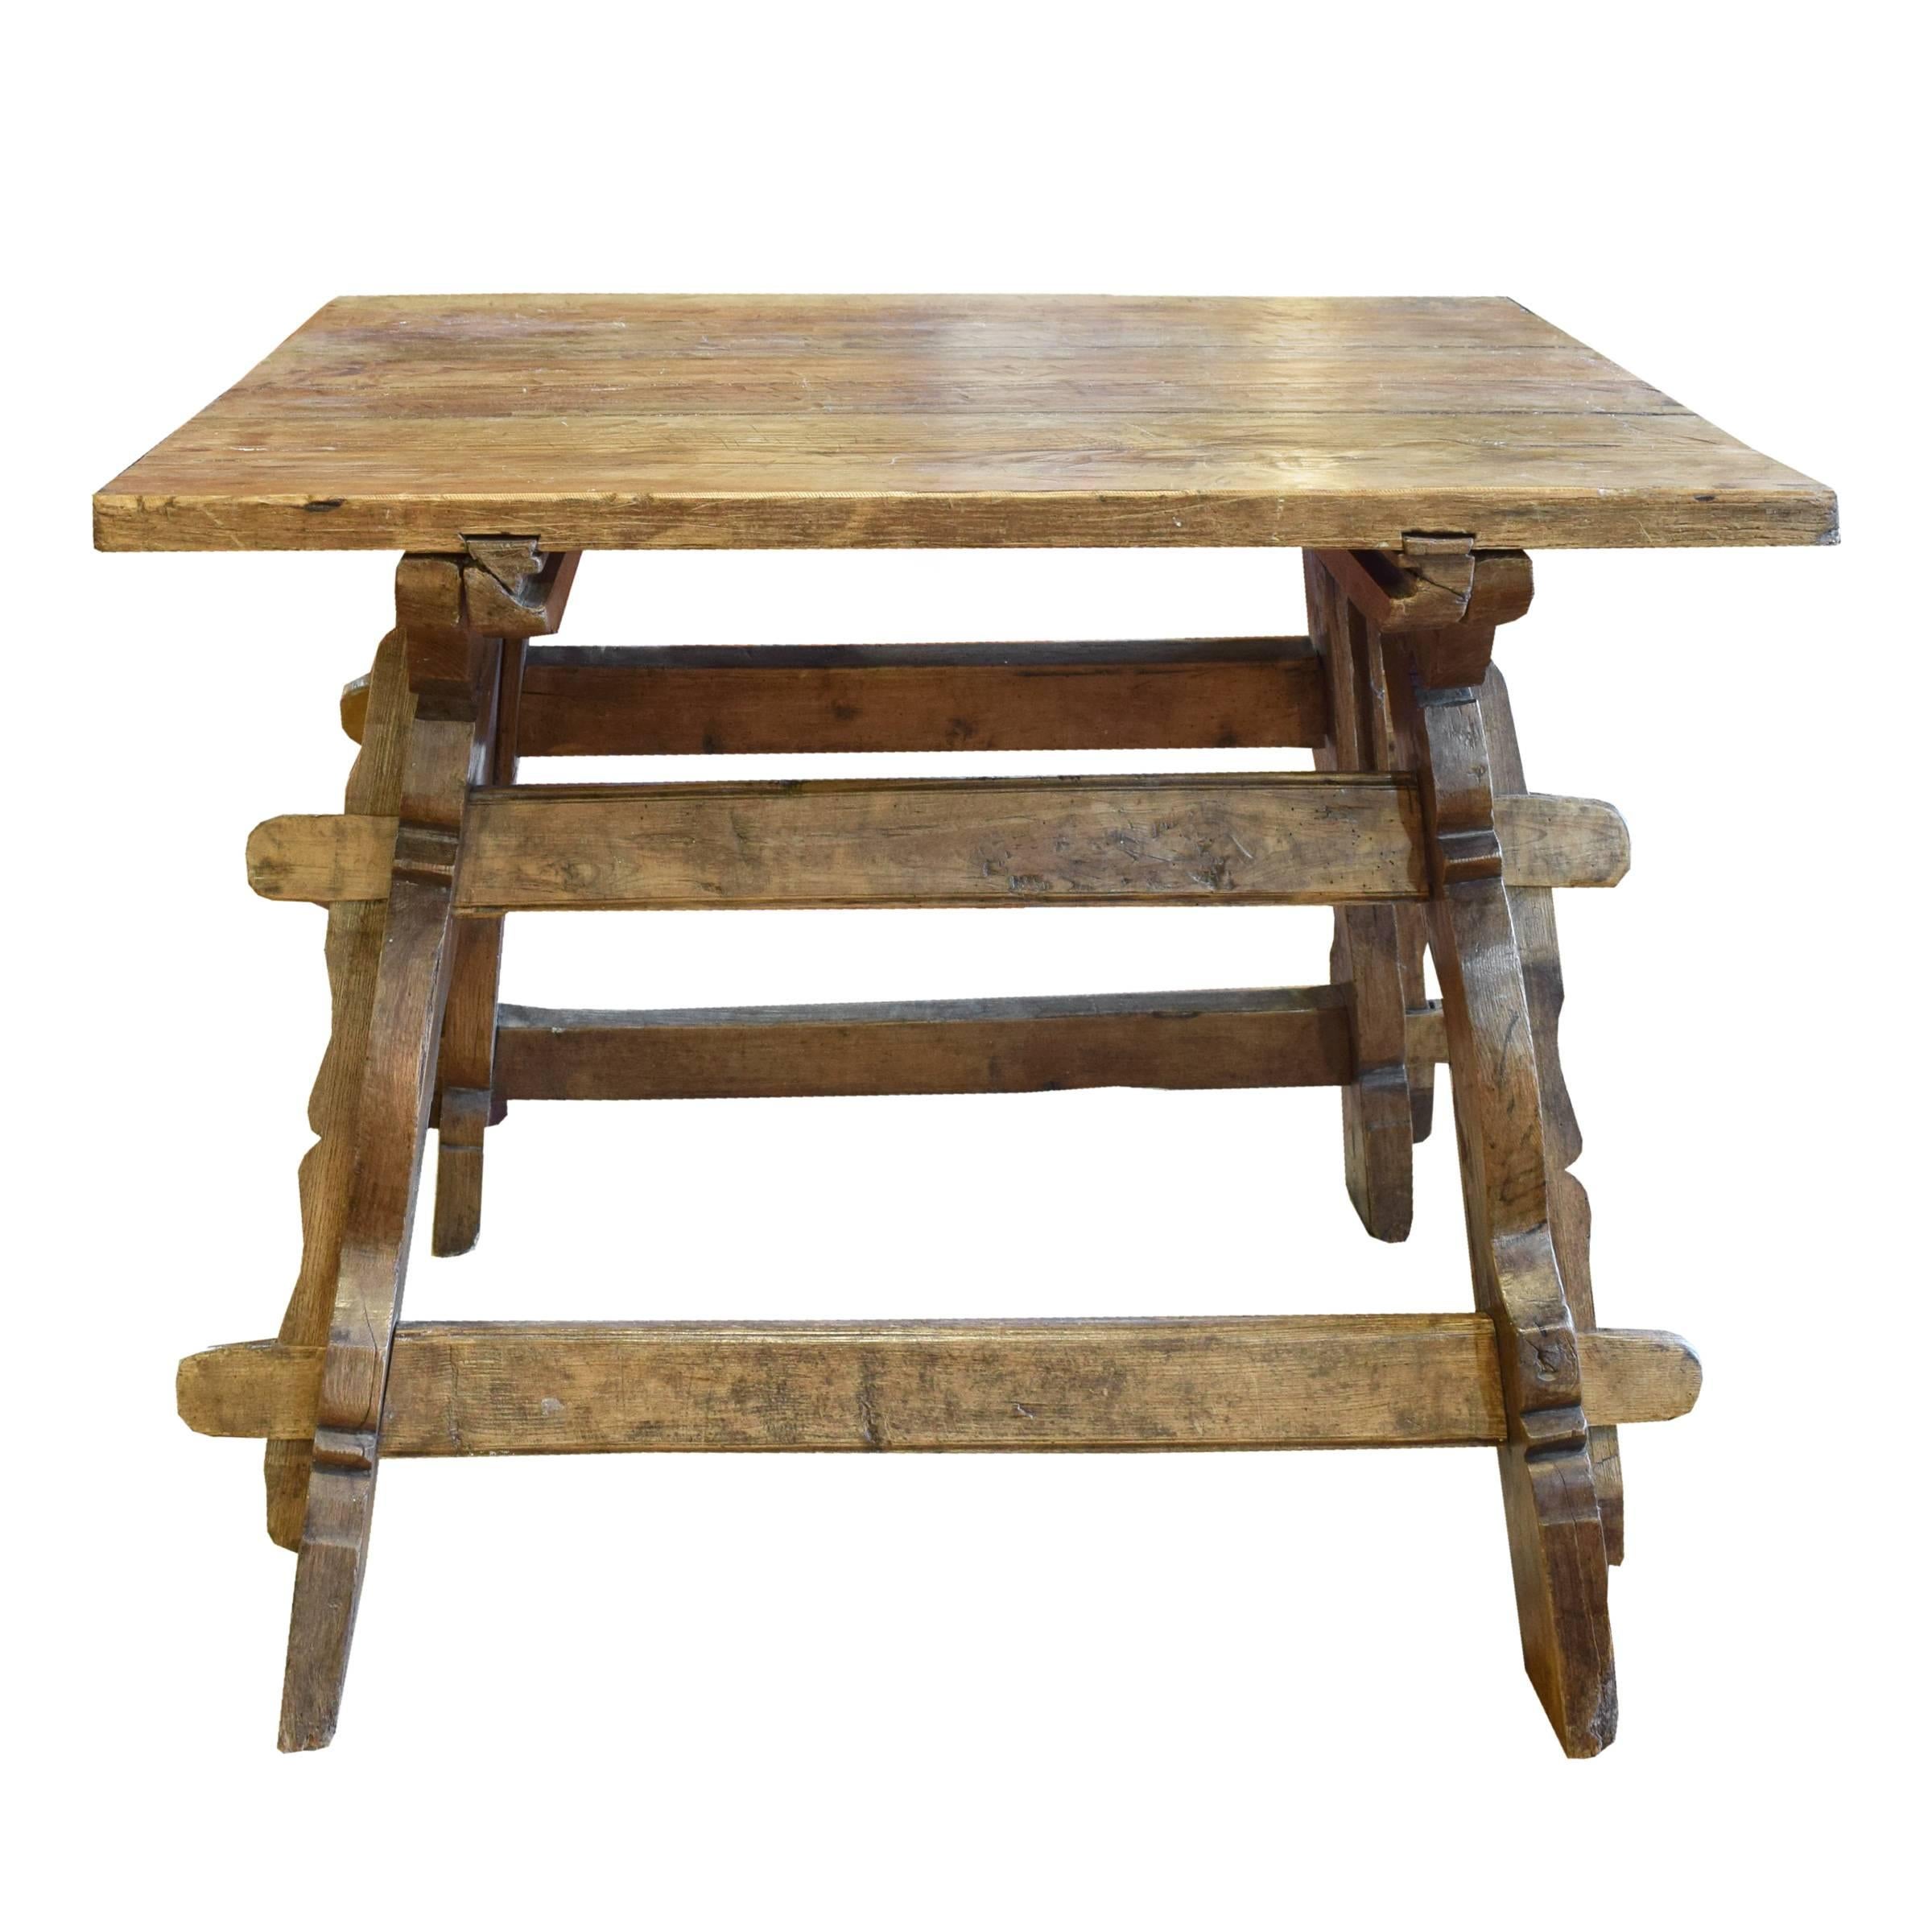 A rare Bavarian Jogl table with a thick wood top, A-frame legs with pregged double stretchers and a carved apron on one side, 19th century.